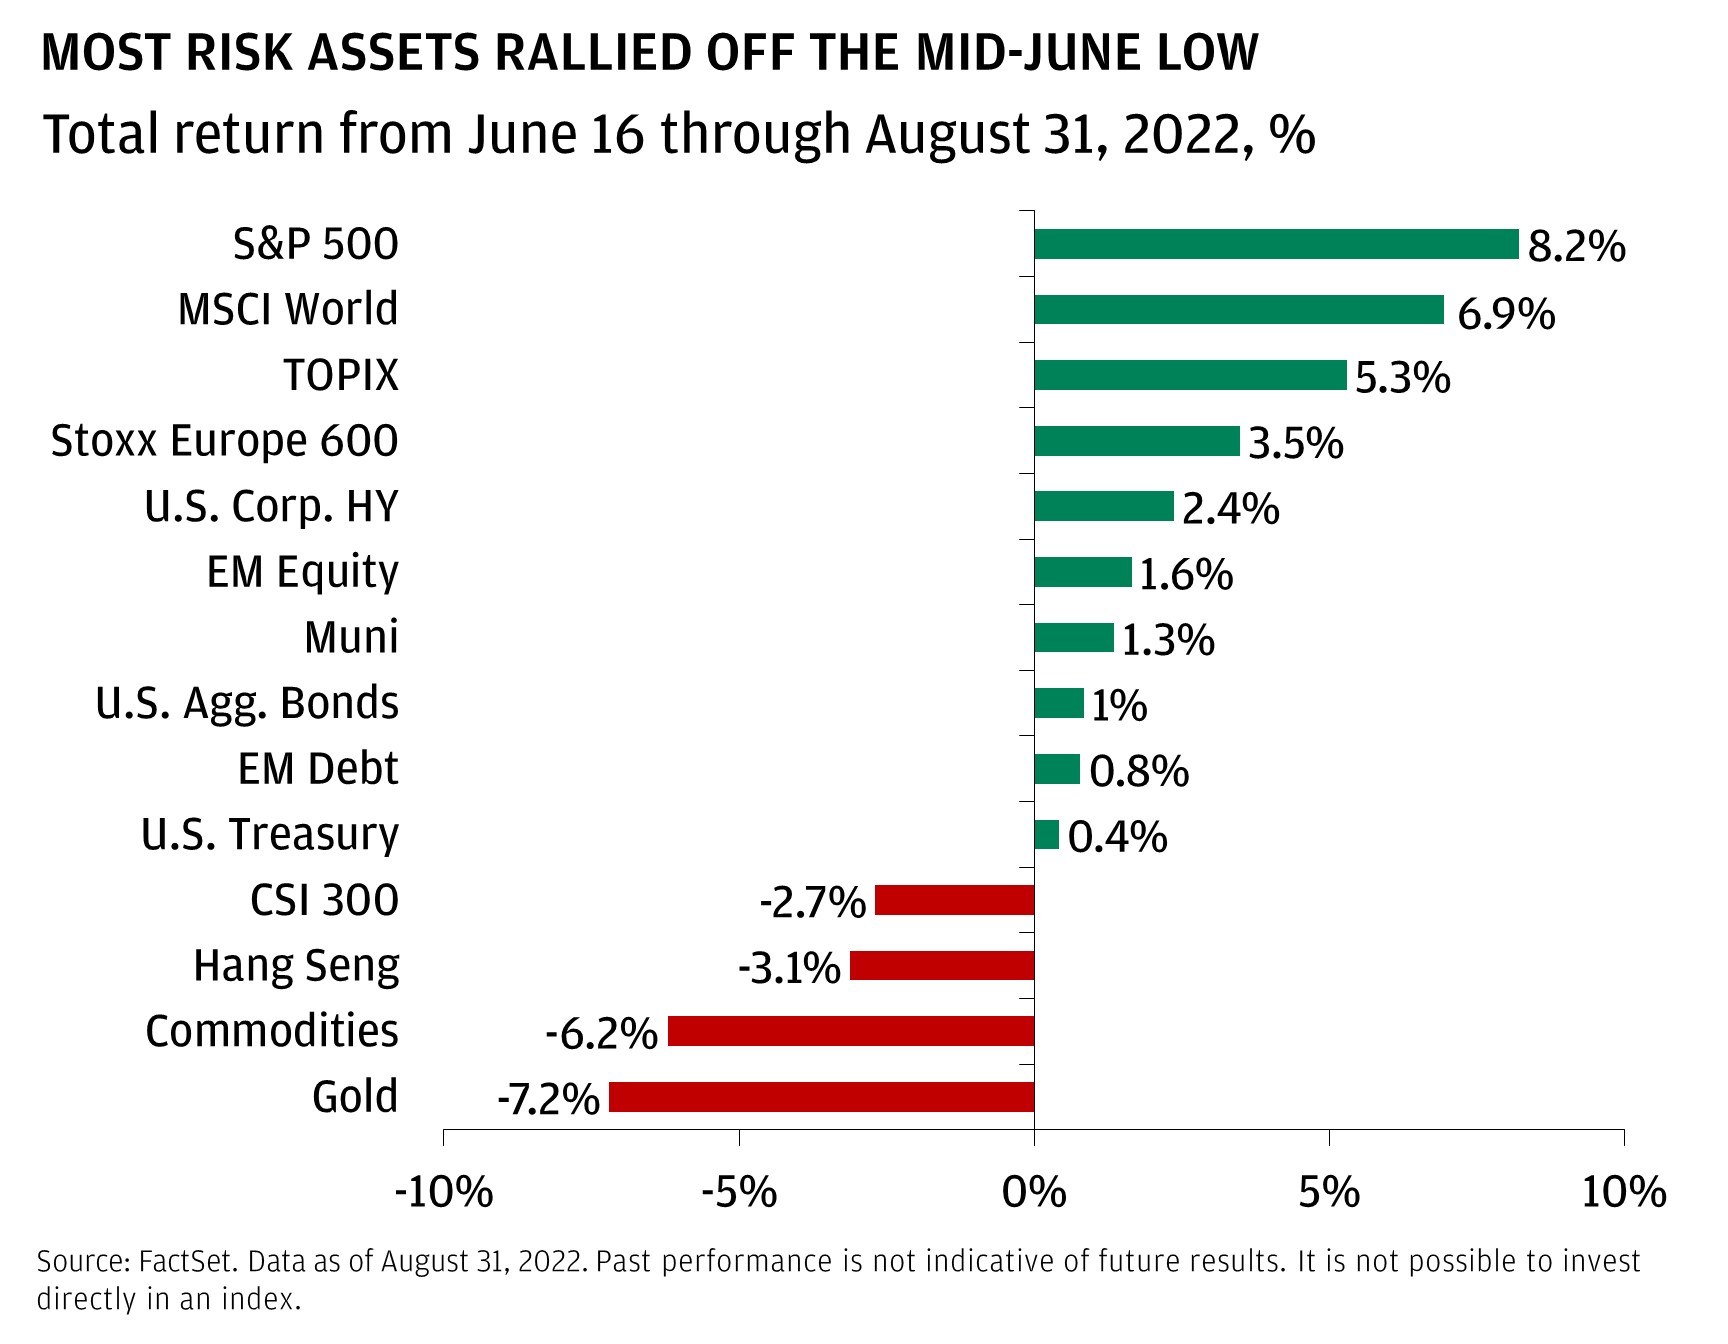 This chart shows the performance of assets from June 16 to August 31, 2022.